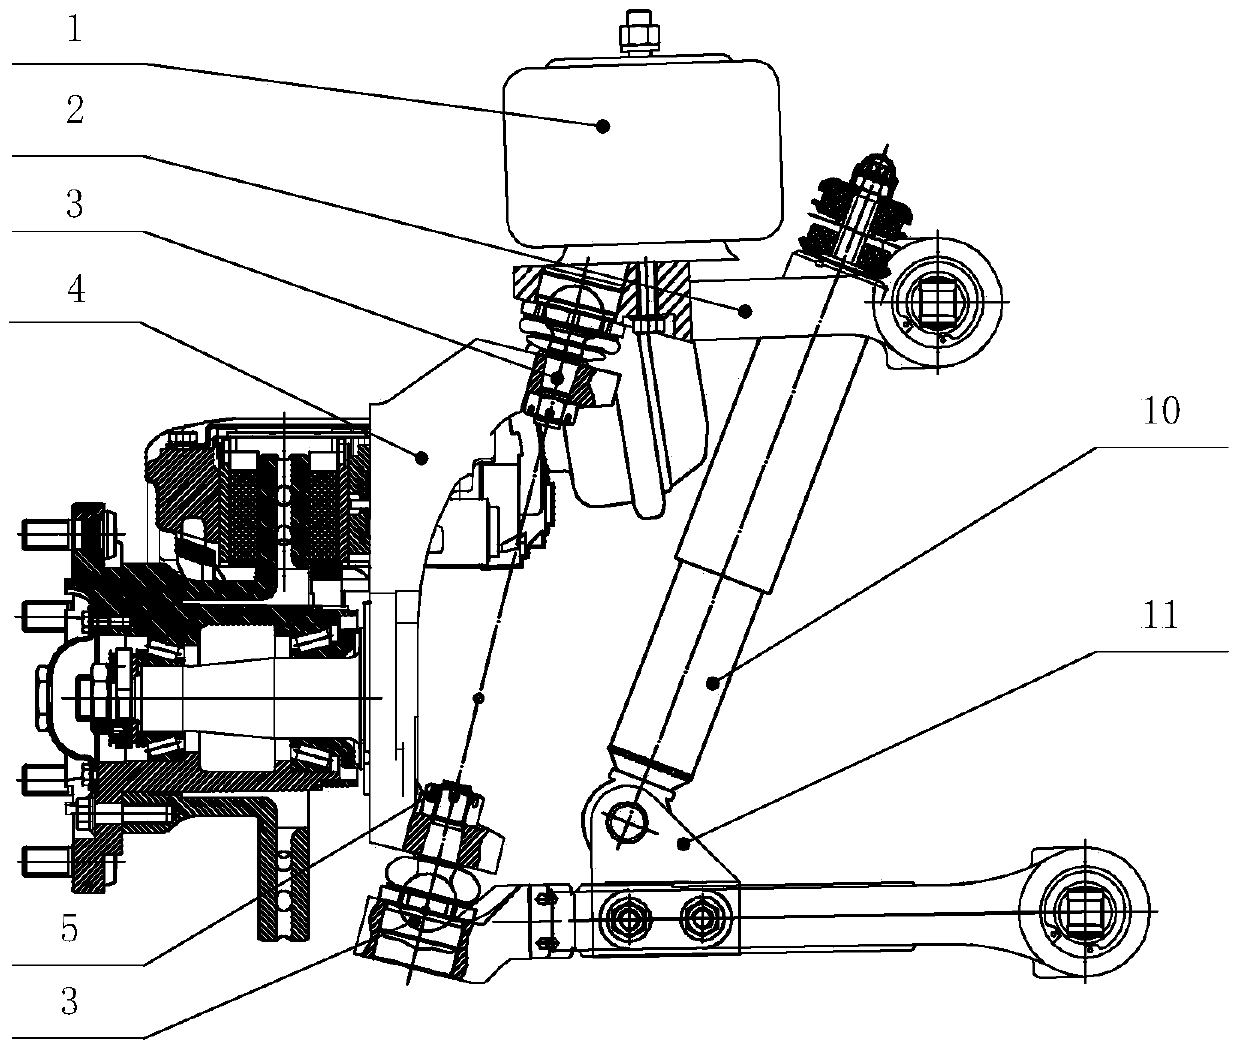 Independent suspension front axle with virtual kingpin structure